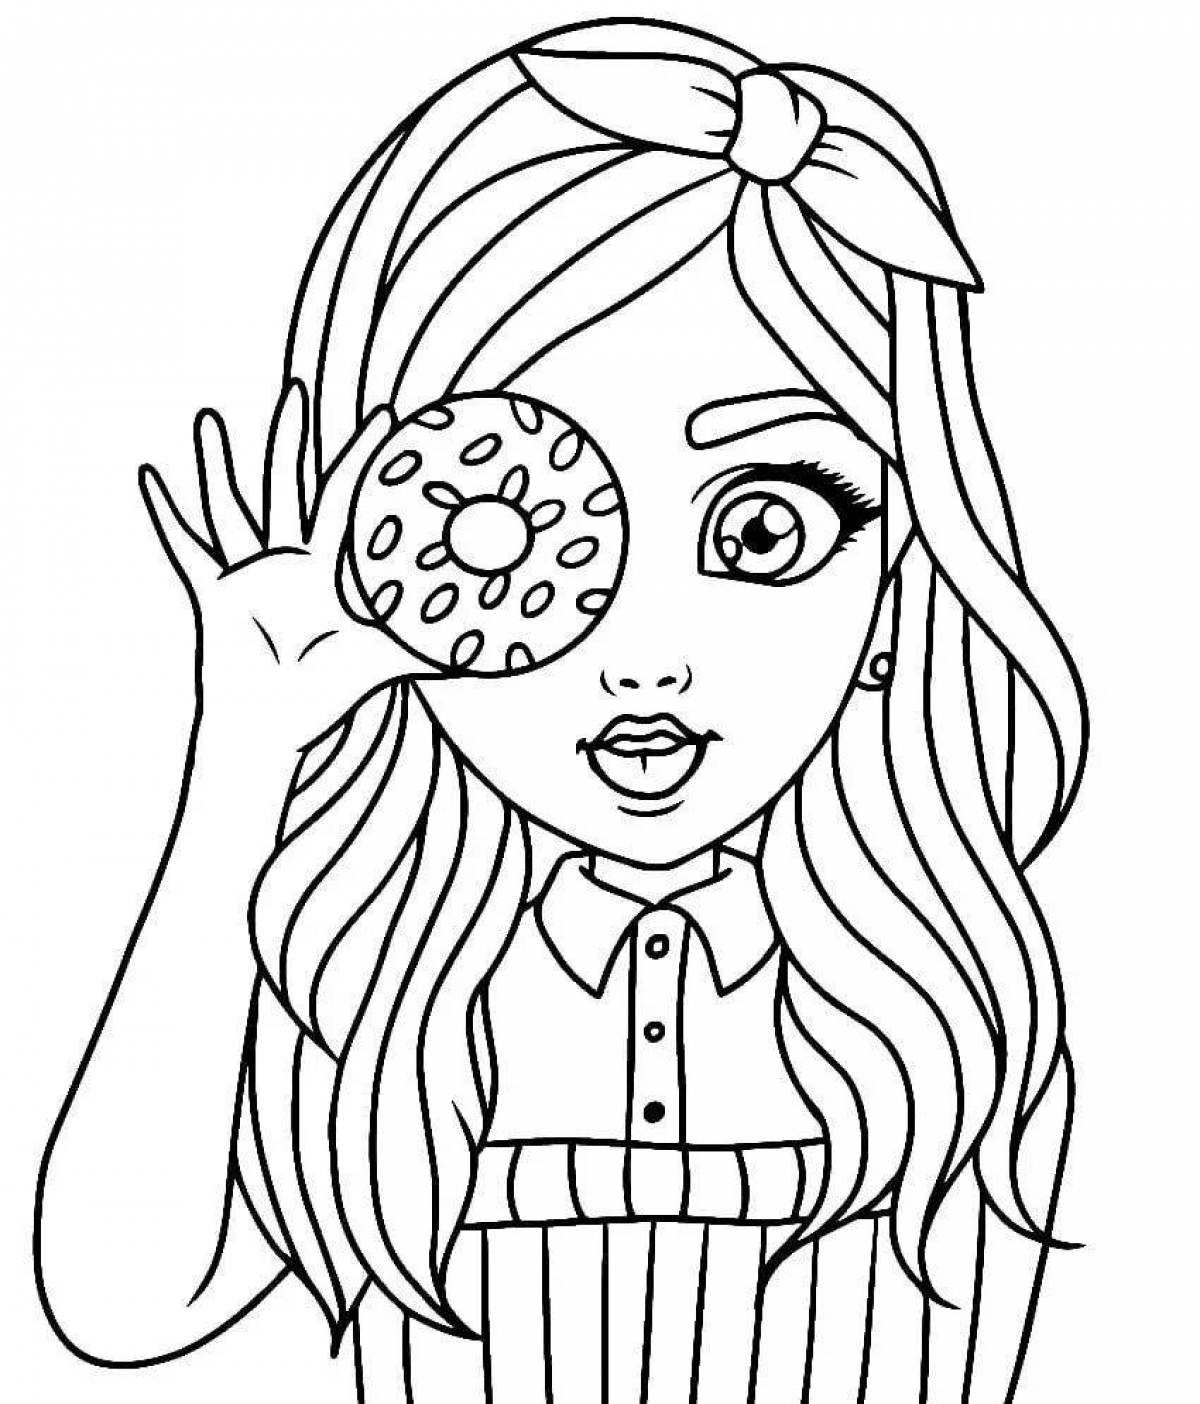 Color-feverish coloring page for girls 13 years old modern